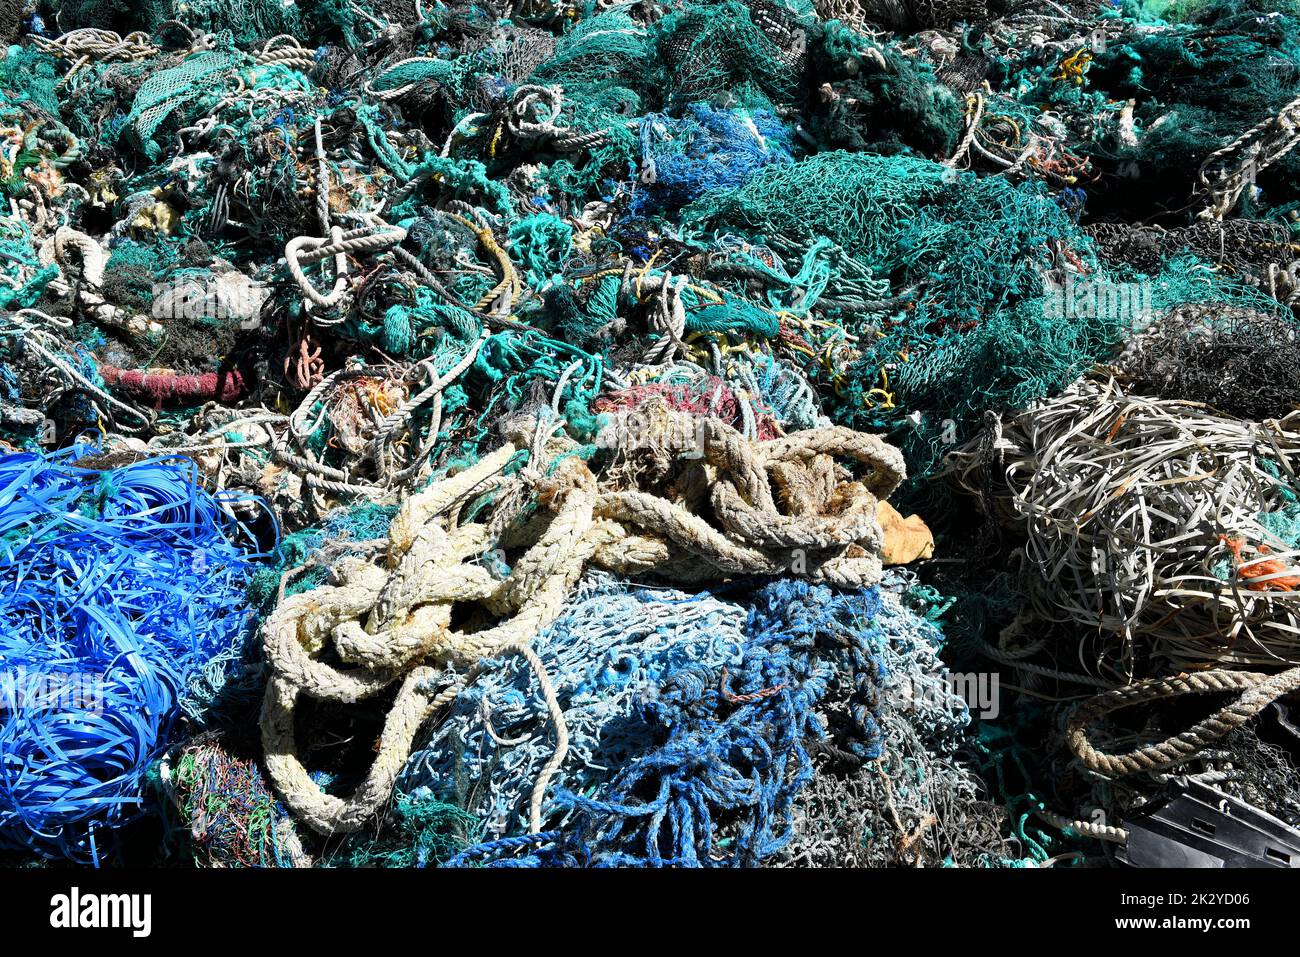 A large pile of trawler fishing nets, ropes and debris dredged up from the  Port of Los Angeles. Fishing nets are a major source of ocean pollution. Stock Photo